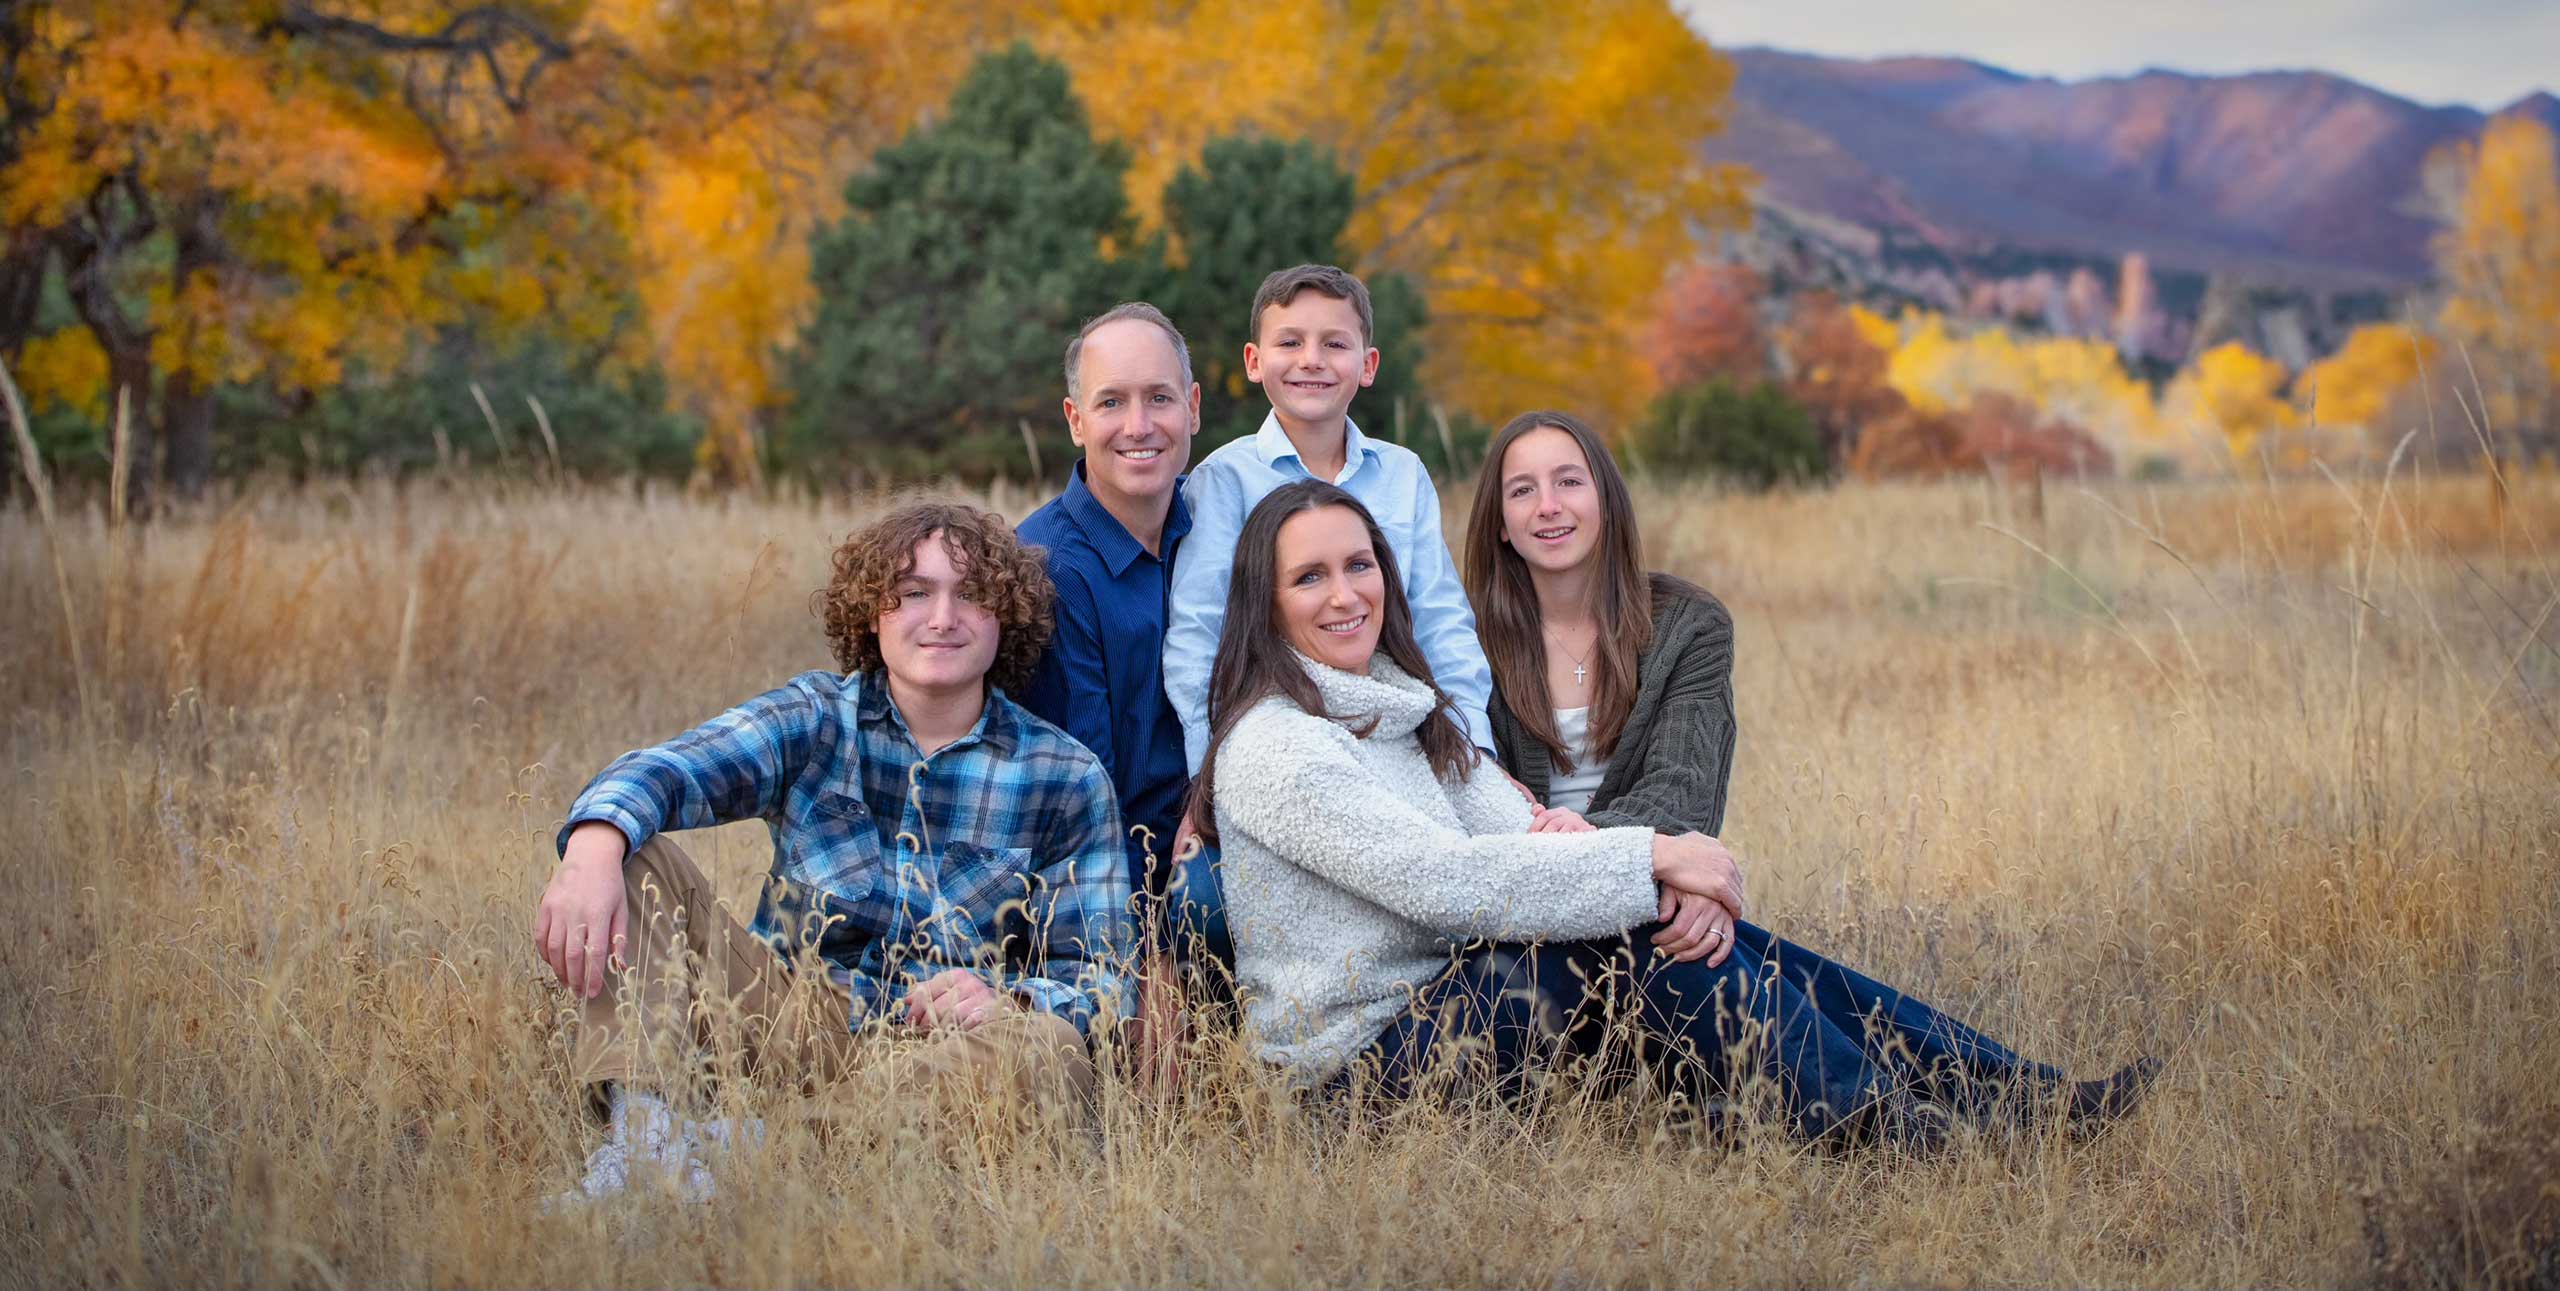 North Academy Chiropractic family photo in Colorado Springs